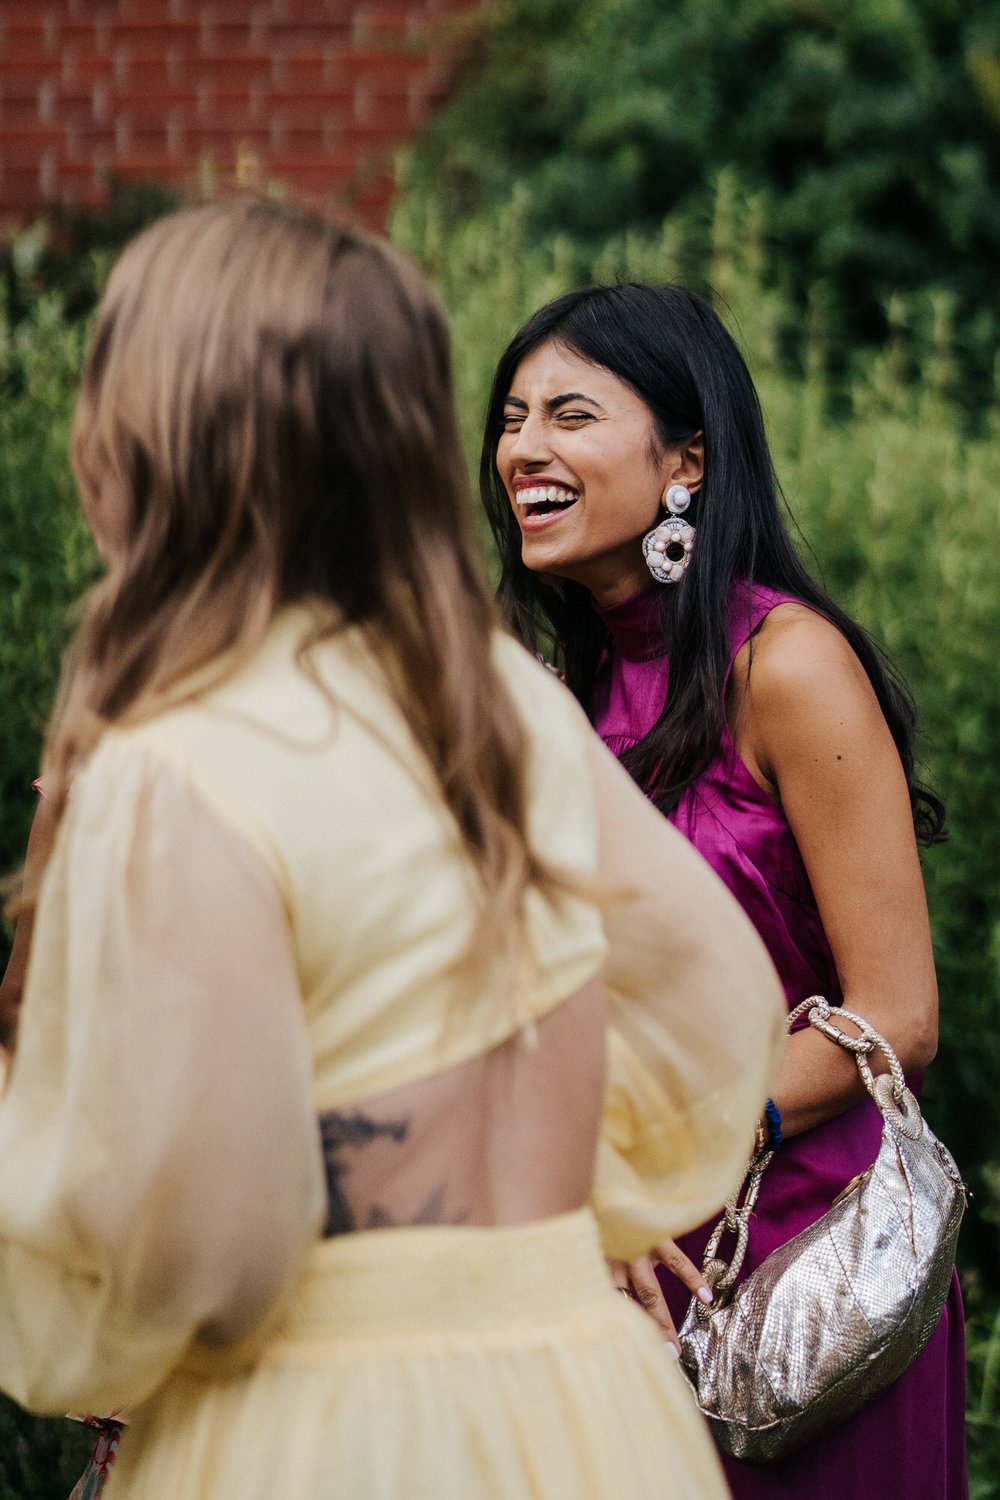 Candid of wedding guests laughing and enjoying herself